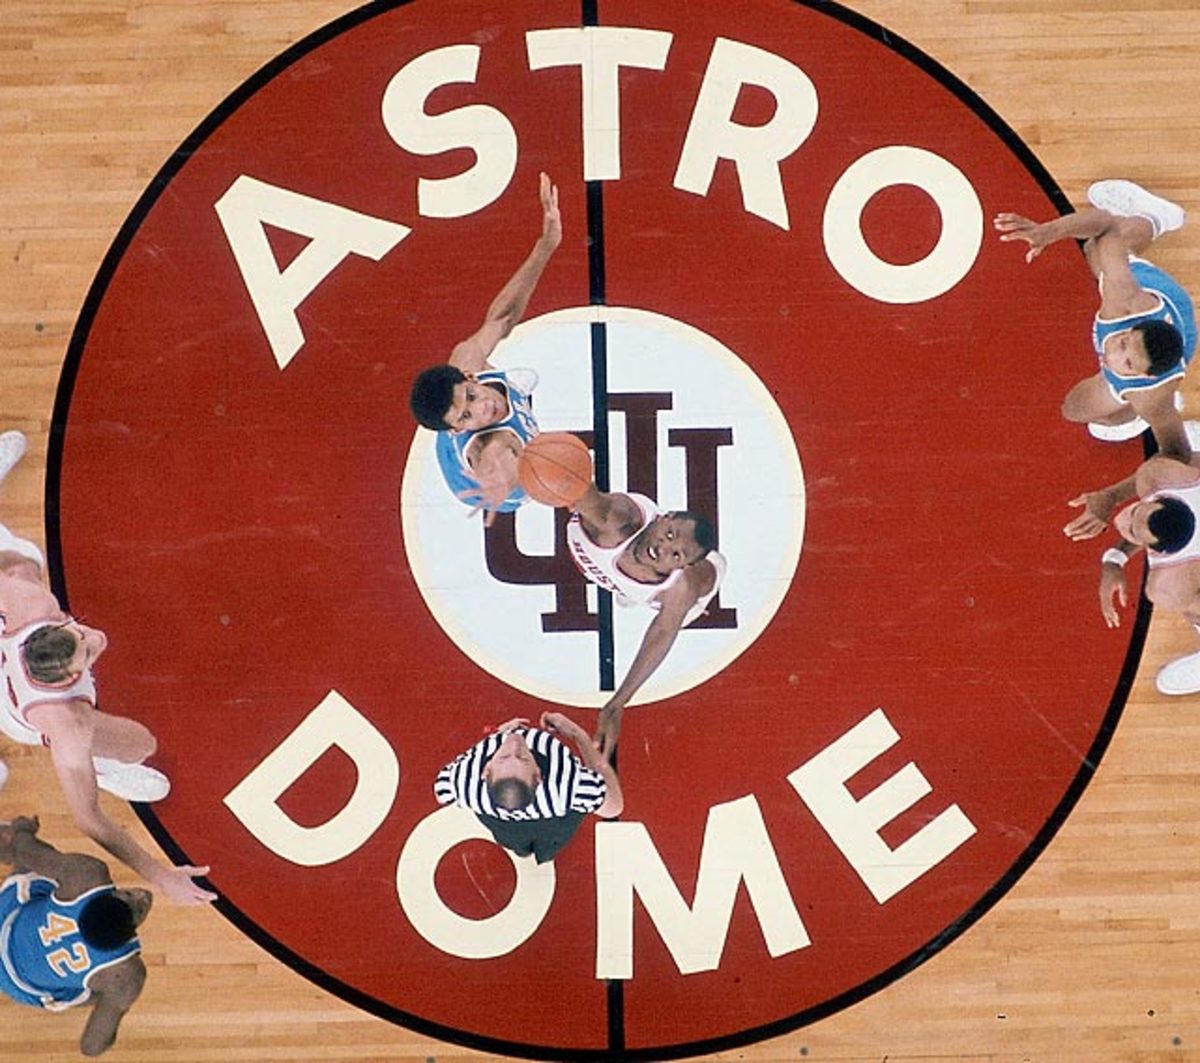 1968 at the Houston Astrodome